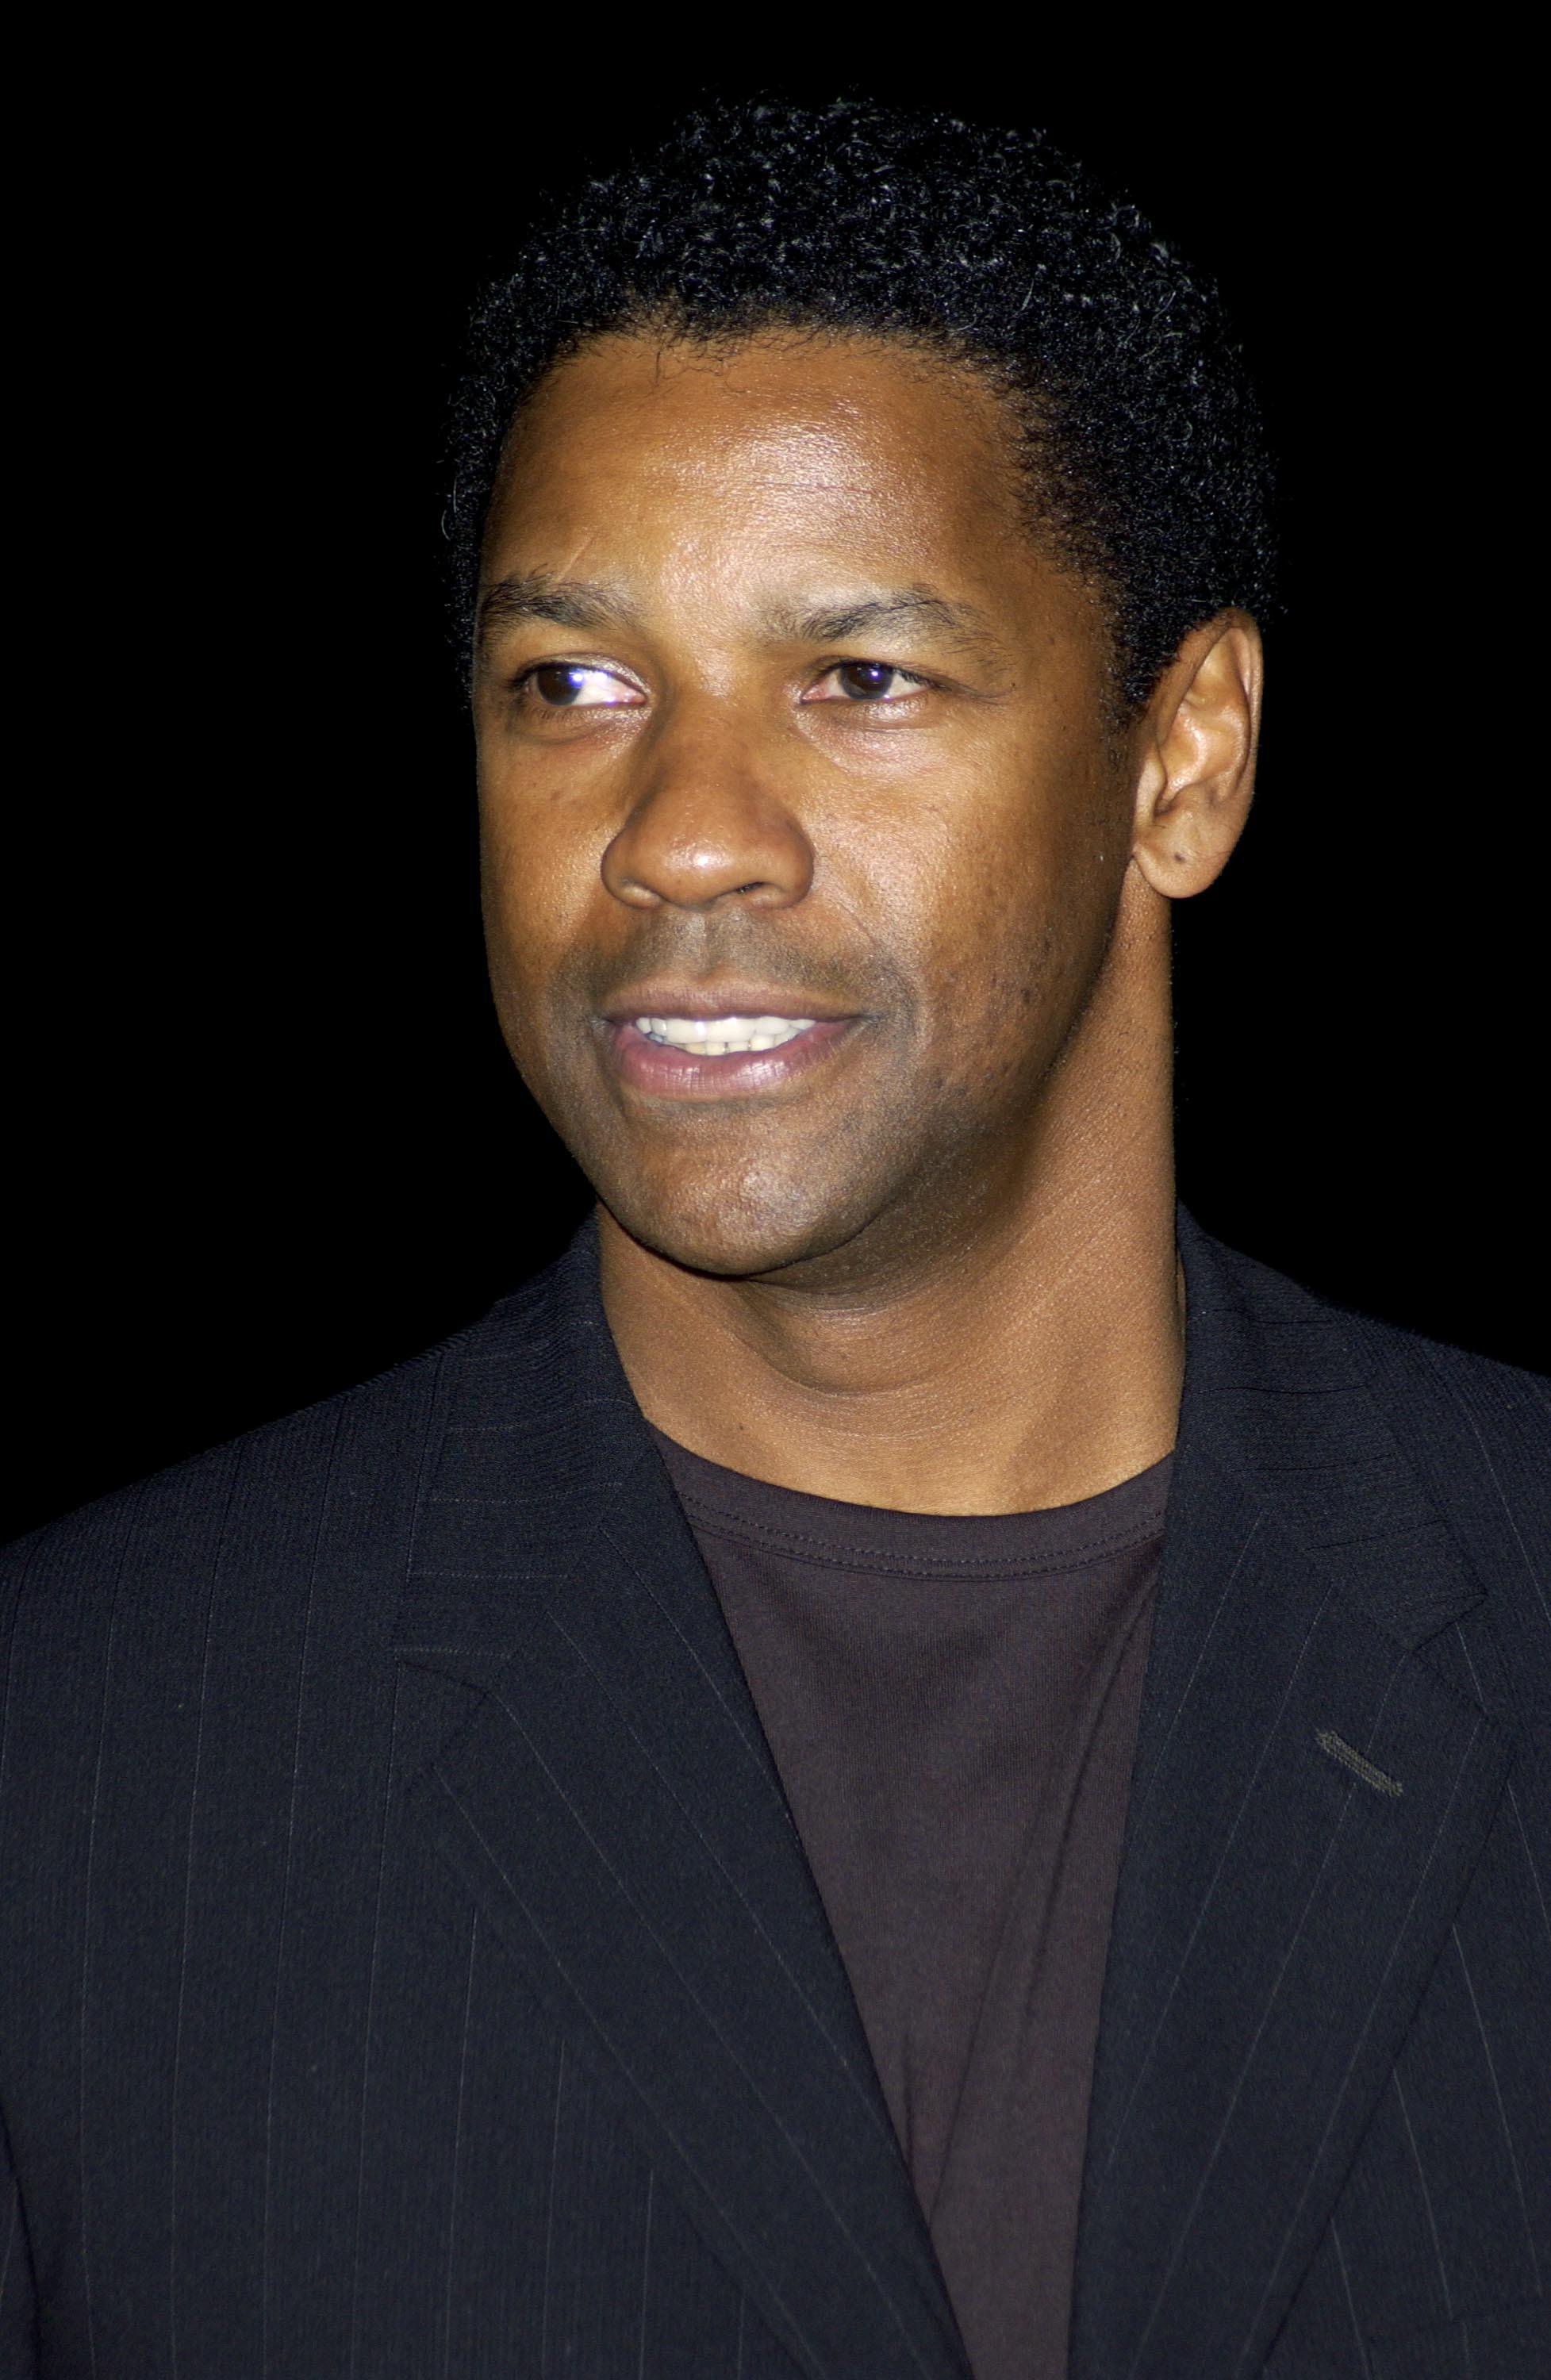 Then & Now Denzel Washington Over The Years [PHOTOS]